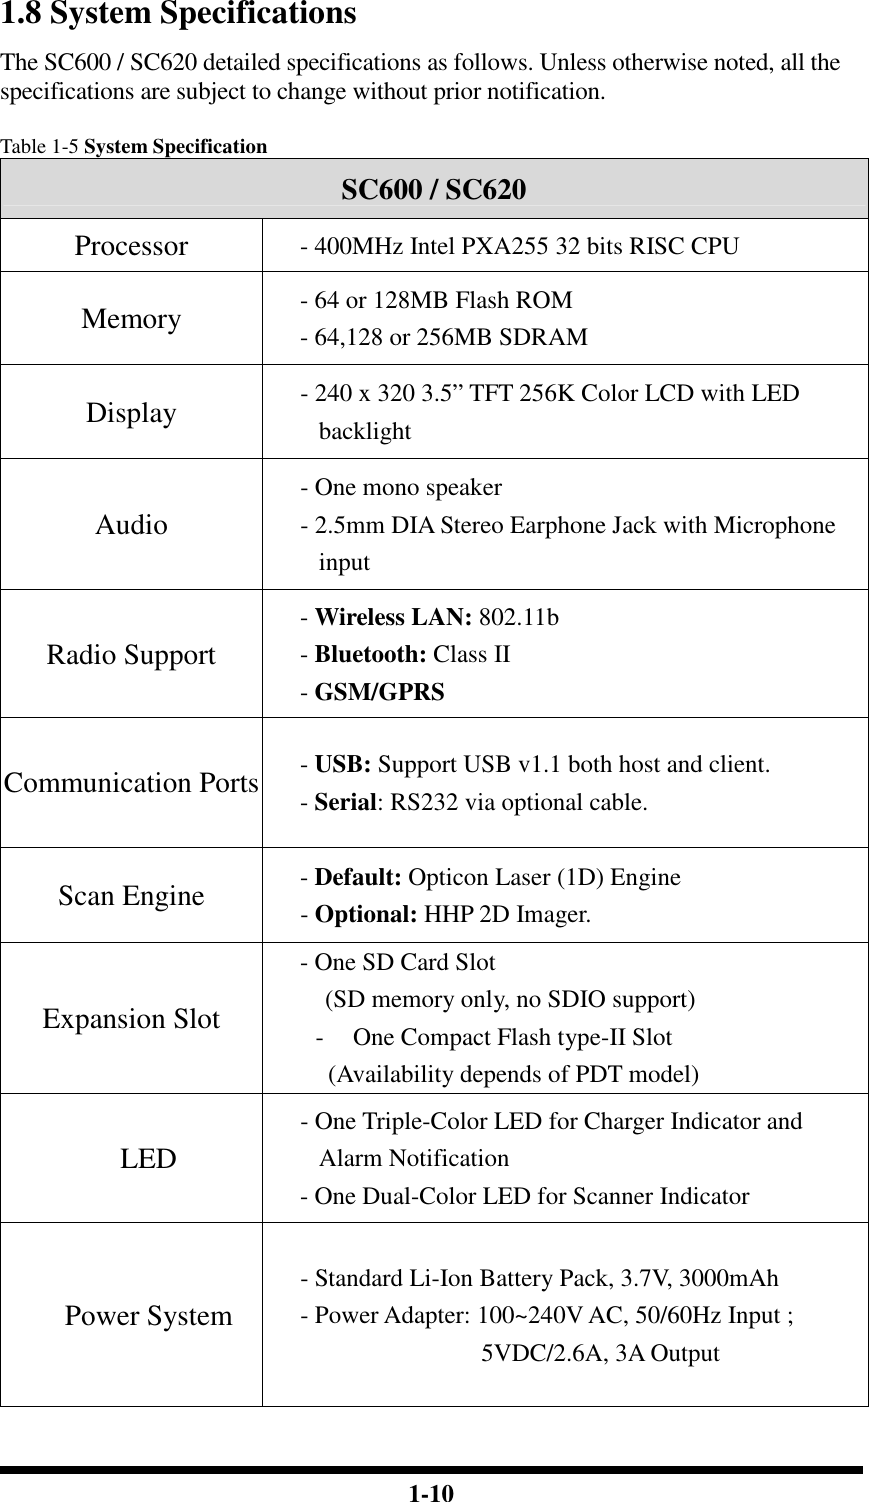  1-10 1.8 System Specifications The SC600 / SC620 detailed specifications as follows. Unless otherwise noted, all the specifications are subject to change without prior notification.  Table 1-5 System Specification SC600 / SC620 Processor - 400MHz Intel PXA255 32 bits RISC CPU Memory - 64 or 128MB Flash ROM - 64,128 or 256MB SDRAM Display - 240 x 320 3.5” TFT 256K Color LCD with LED backlight Audio - One mono speaker - 2.5mm DIA Stereo Earphone Jack with Microphone input Radio Support - Wireless LAN: 802.11b - Bluetooth: Class II   - GSM/GPRS Communication Ports - USB: Support USB v1.1 both host and client. - Serial: RS232 via optional cable. Scan Engine - Default: Opticon Laser (1D) Engine - Optional: HHP 2D Imager. Expansion Slot - One SD Card Slot (SD memory only, no SDIO support) - One Compact Flash type-II Slot (Availability depends of PDT model) LED - One Triple-Color LED for Charger Indicator and Alarm Notification - One Dual-Color LED for Scanner Indicator Power System - Standard Li-Ion Battery Pack, 3.7V, 3000mAh - Power Adapter: 100~240V AC, 50/60Hz Input ; 5VDC/2.6A, 3A Output 